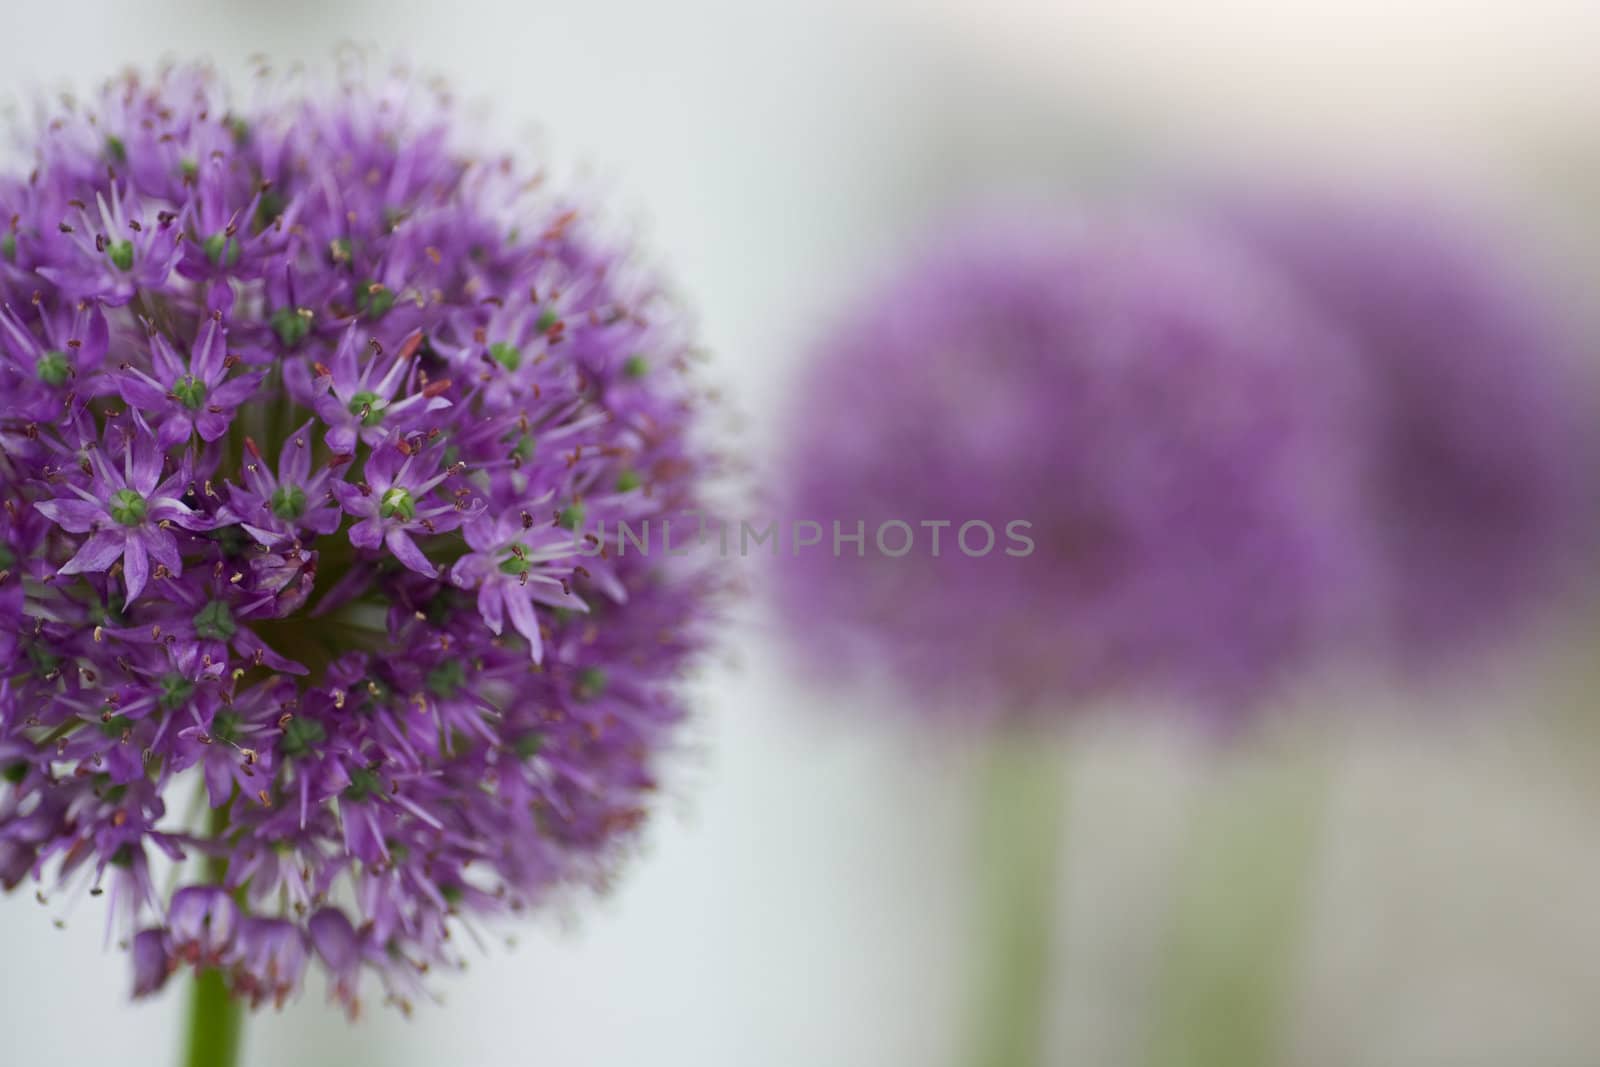 An Allium flower, also known as the 'Gladiator', with out of focus flowers in the background.